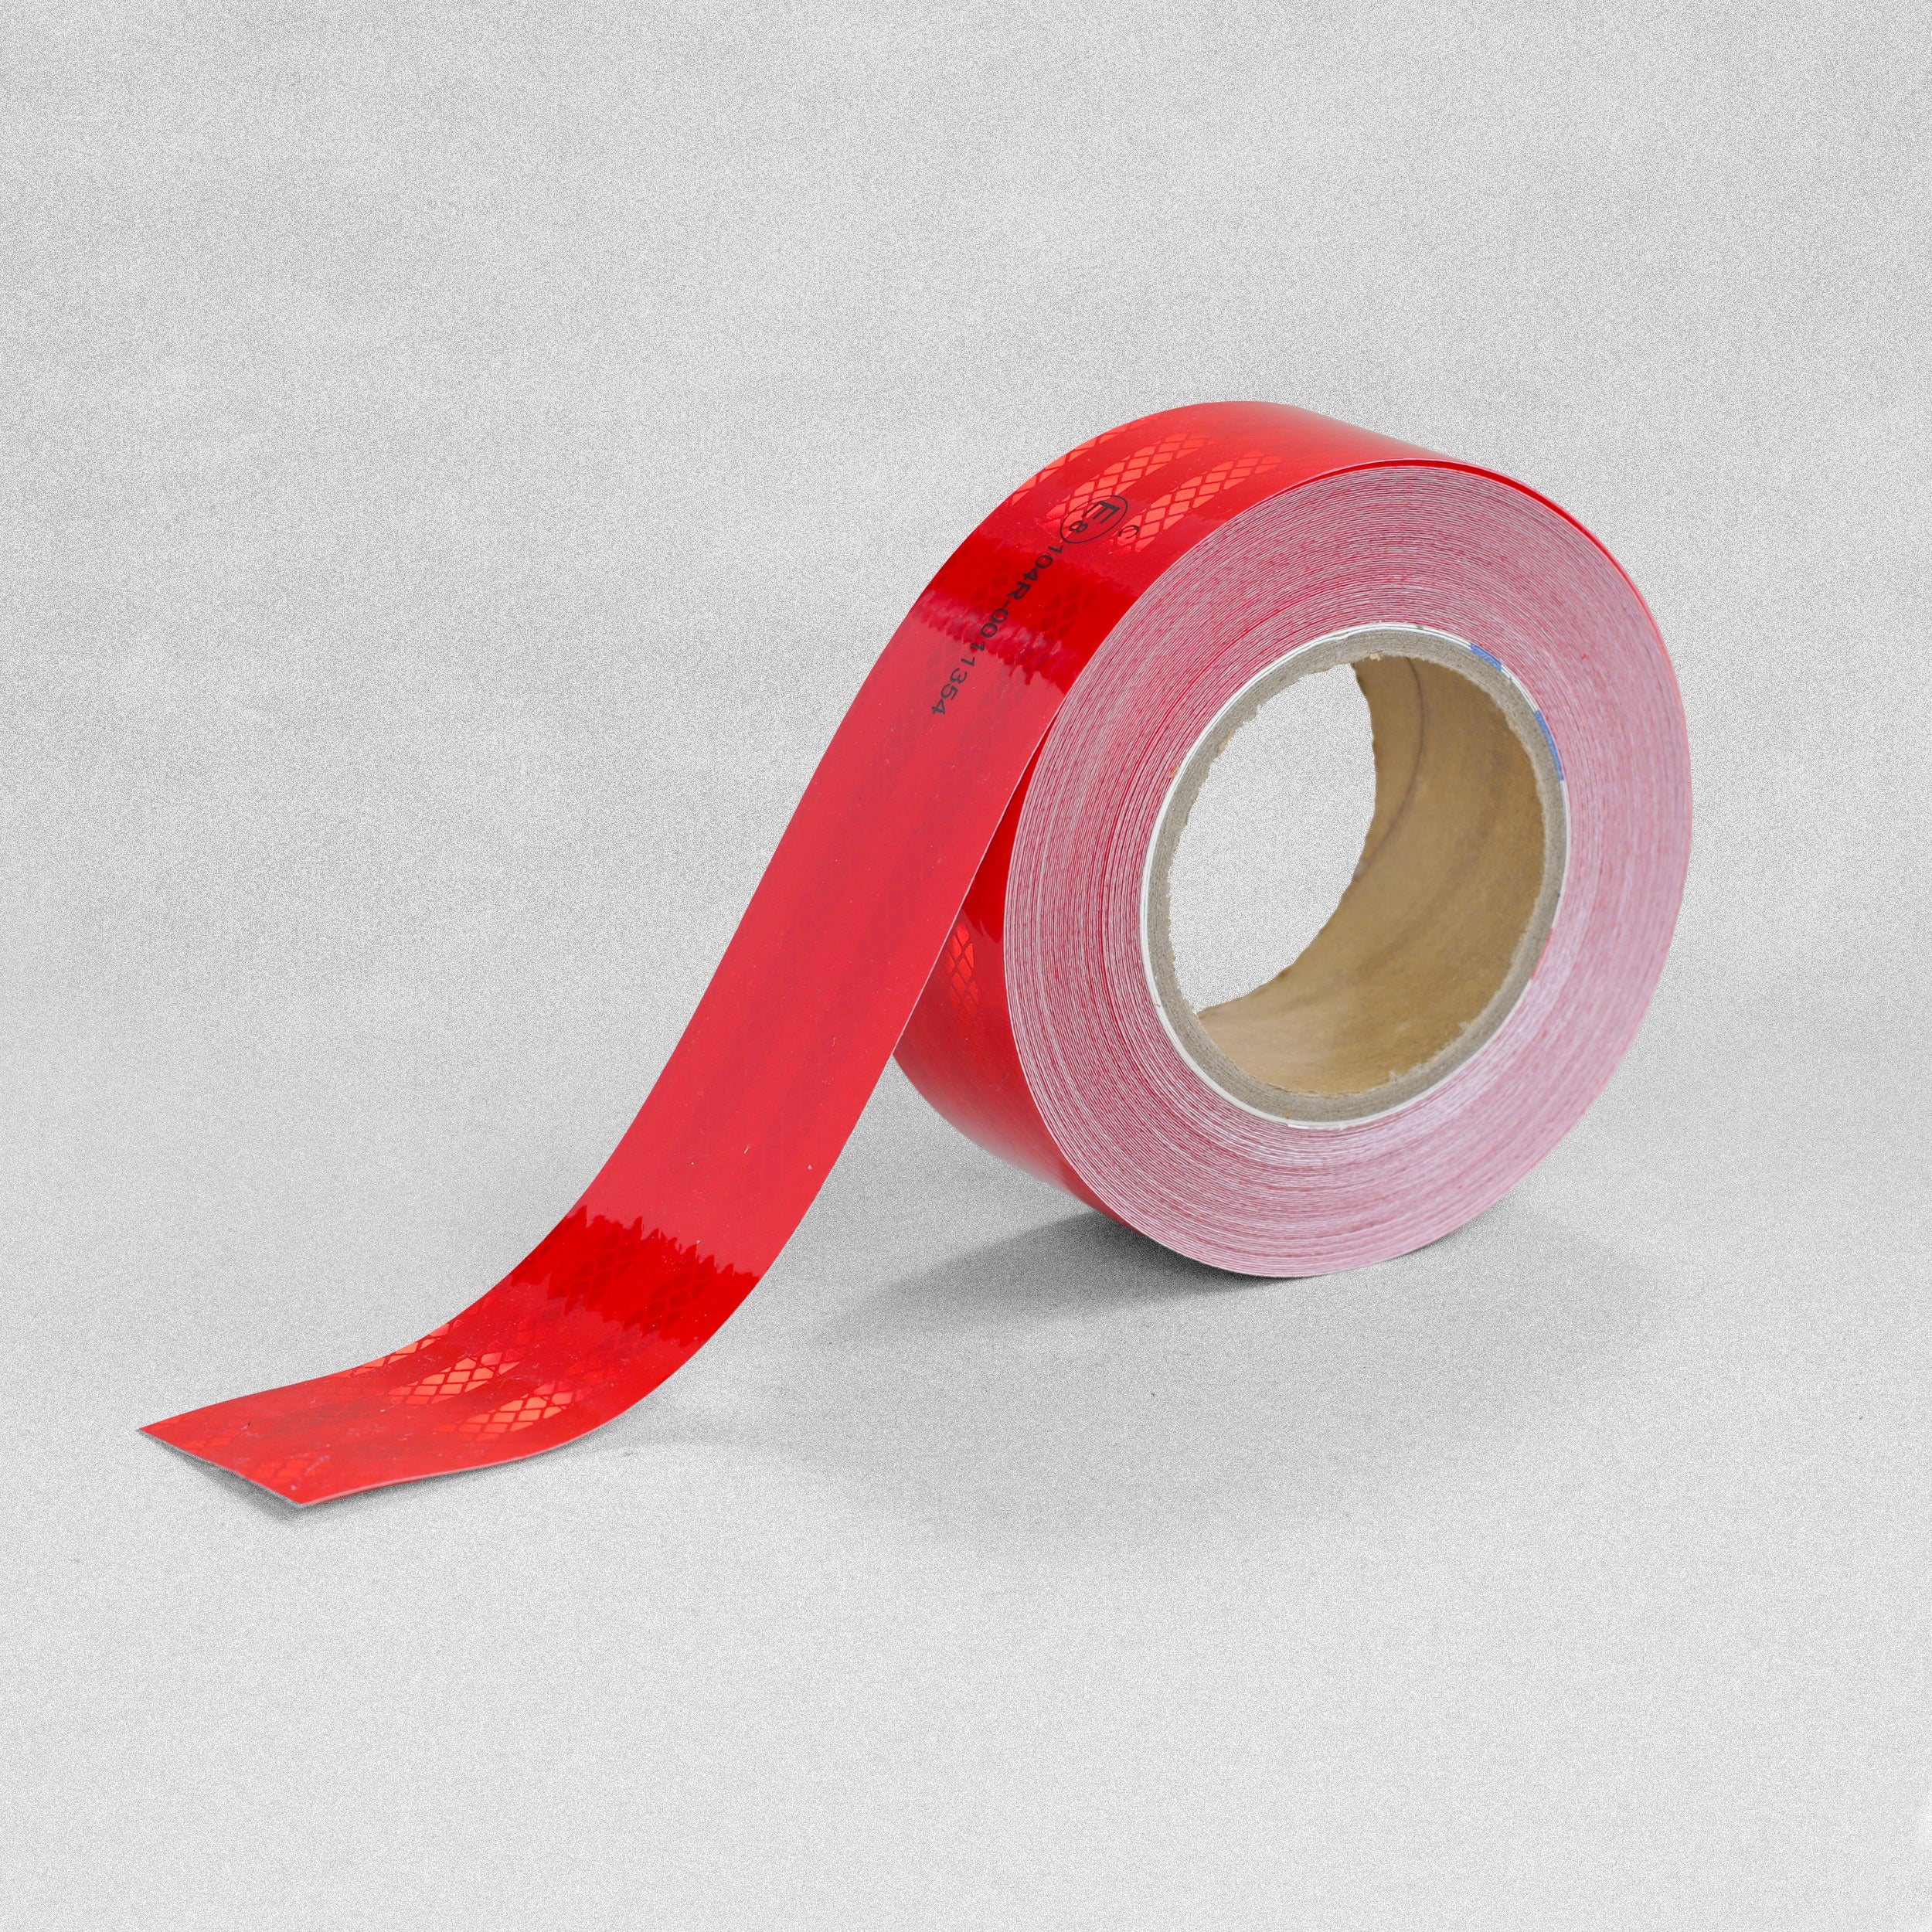 Blaze Vehicle Conspicuity Tape 50mm x 25m - Red